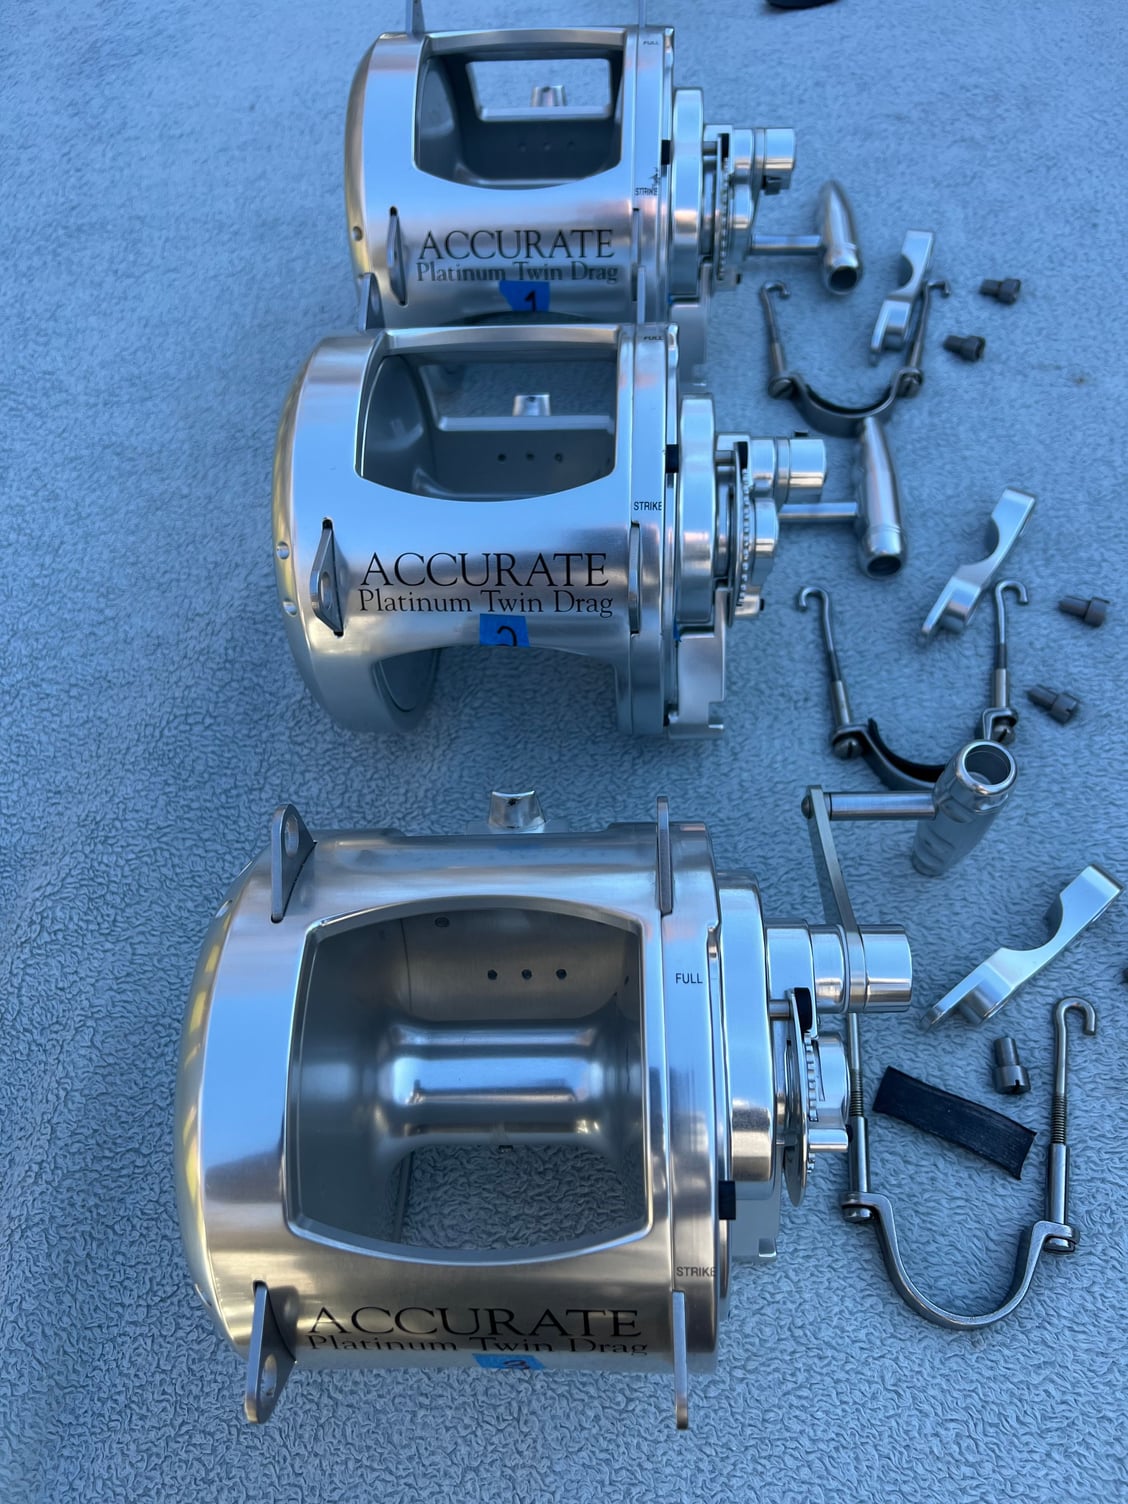 Accurate 130 ATD Mint, Three For Sale $1,600 each OBO - The Hull